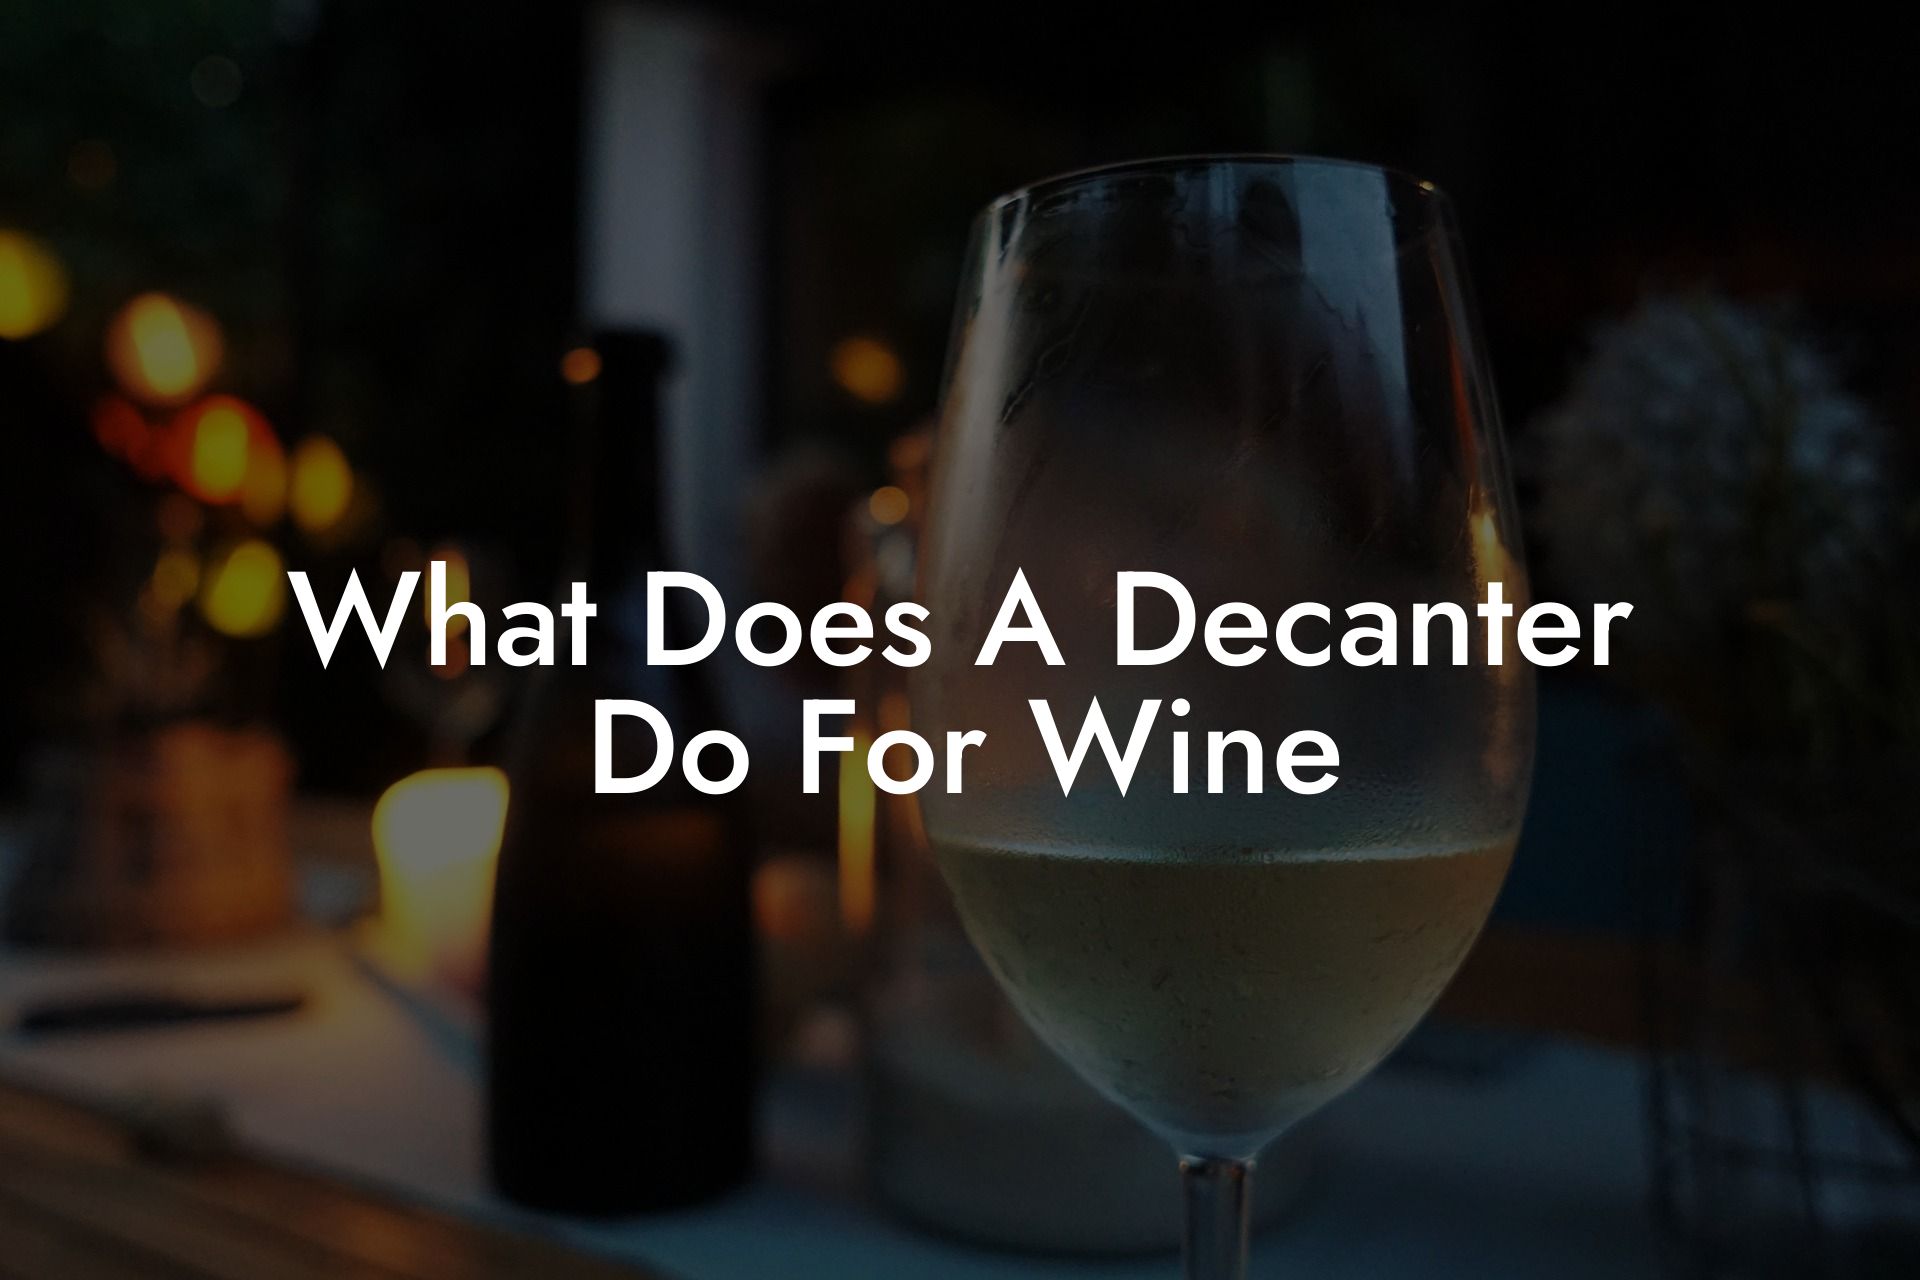 What Does A Decanter Do For Wine